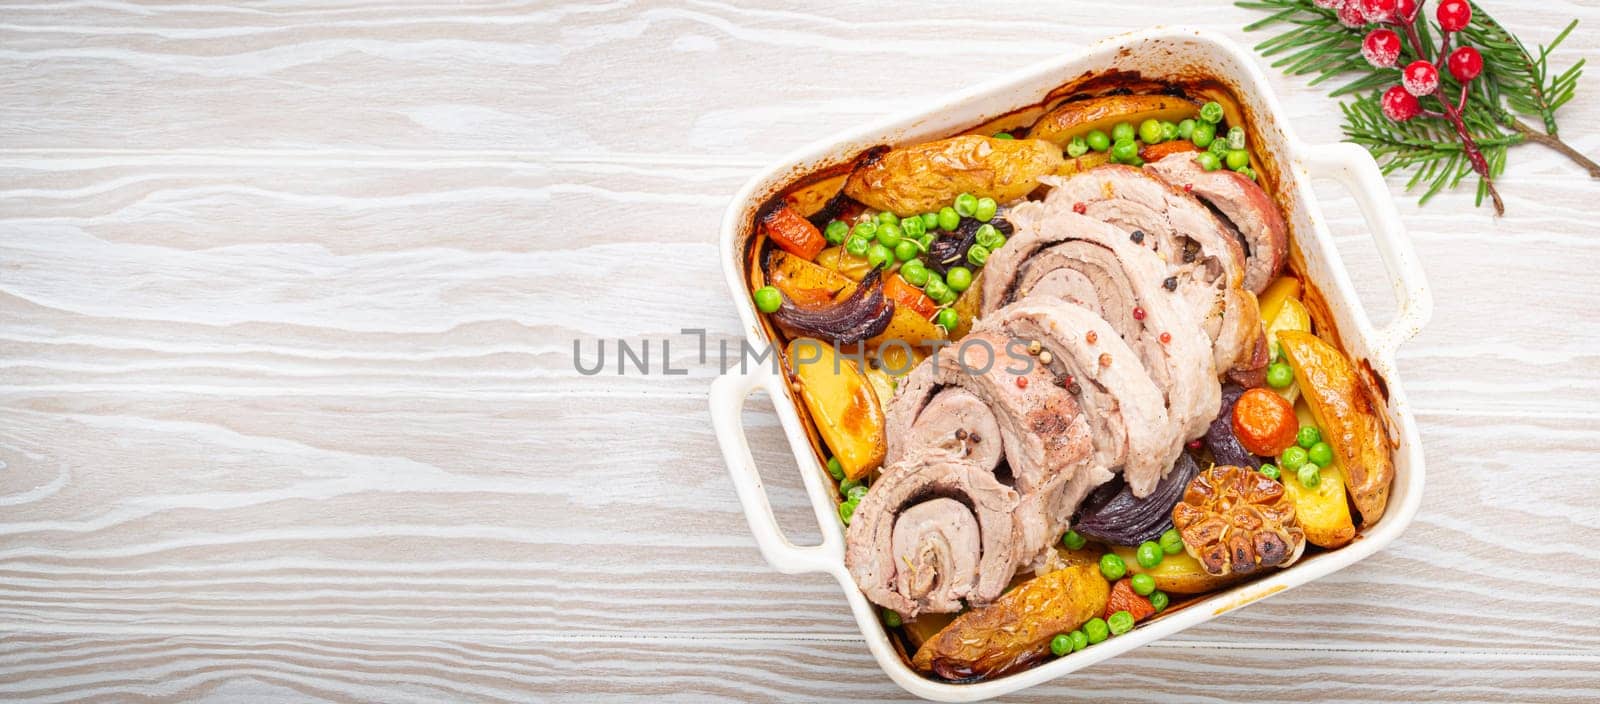 Festive Christmas rolled sliced pork roasted in white casserole dish with potatoes, vegetables and herbs on rustic white wooden background top view. Baked pork roll with vegetables for Xmas dinner by its_al_dente